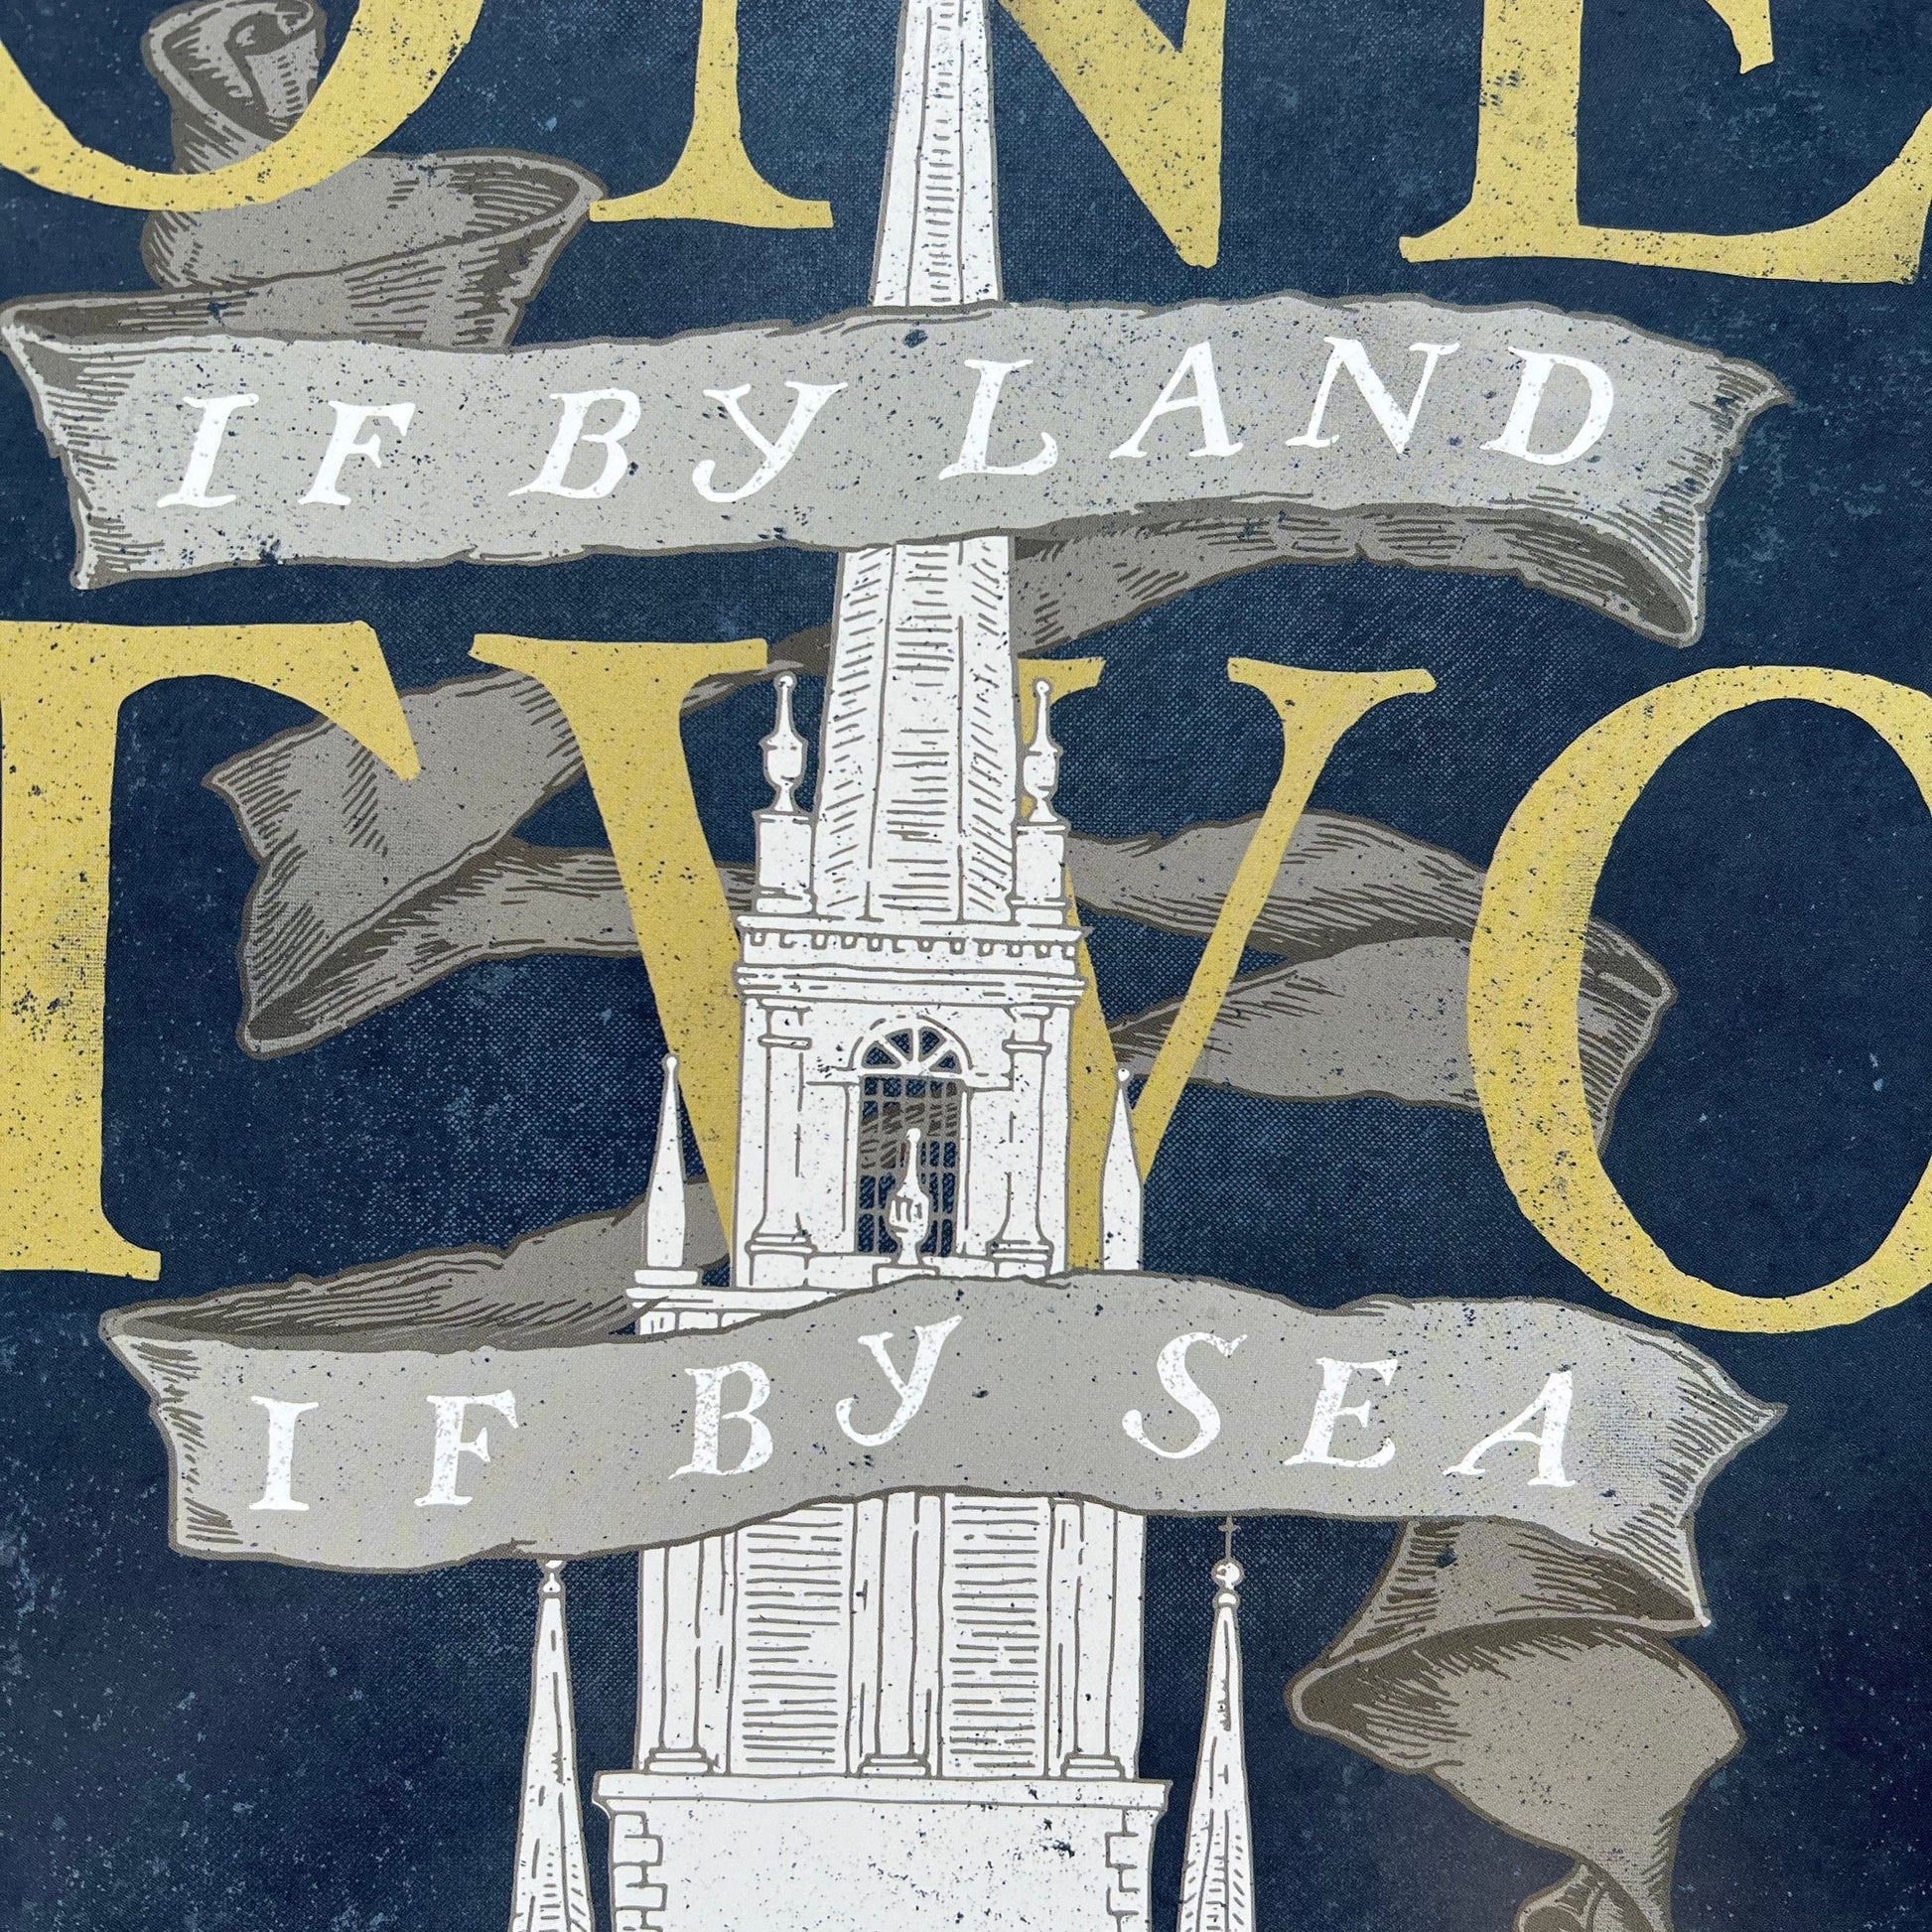 Close-up of "One if by land . . ." Postcard from The History List store